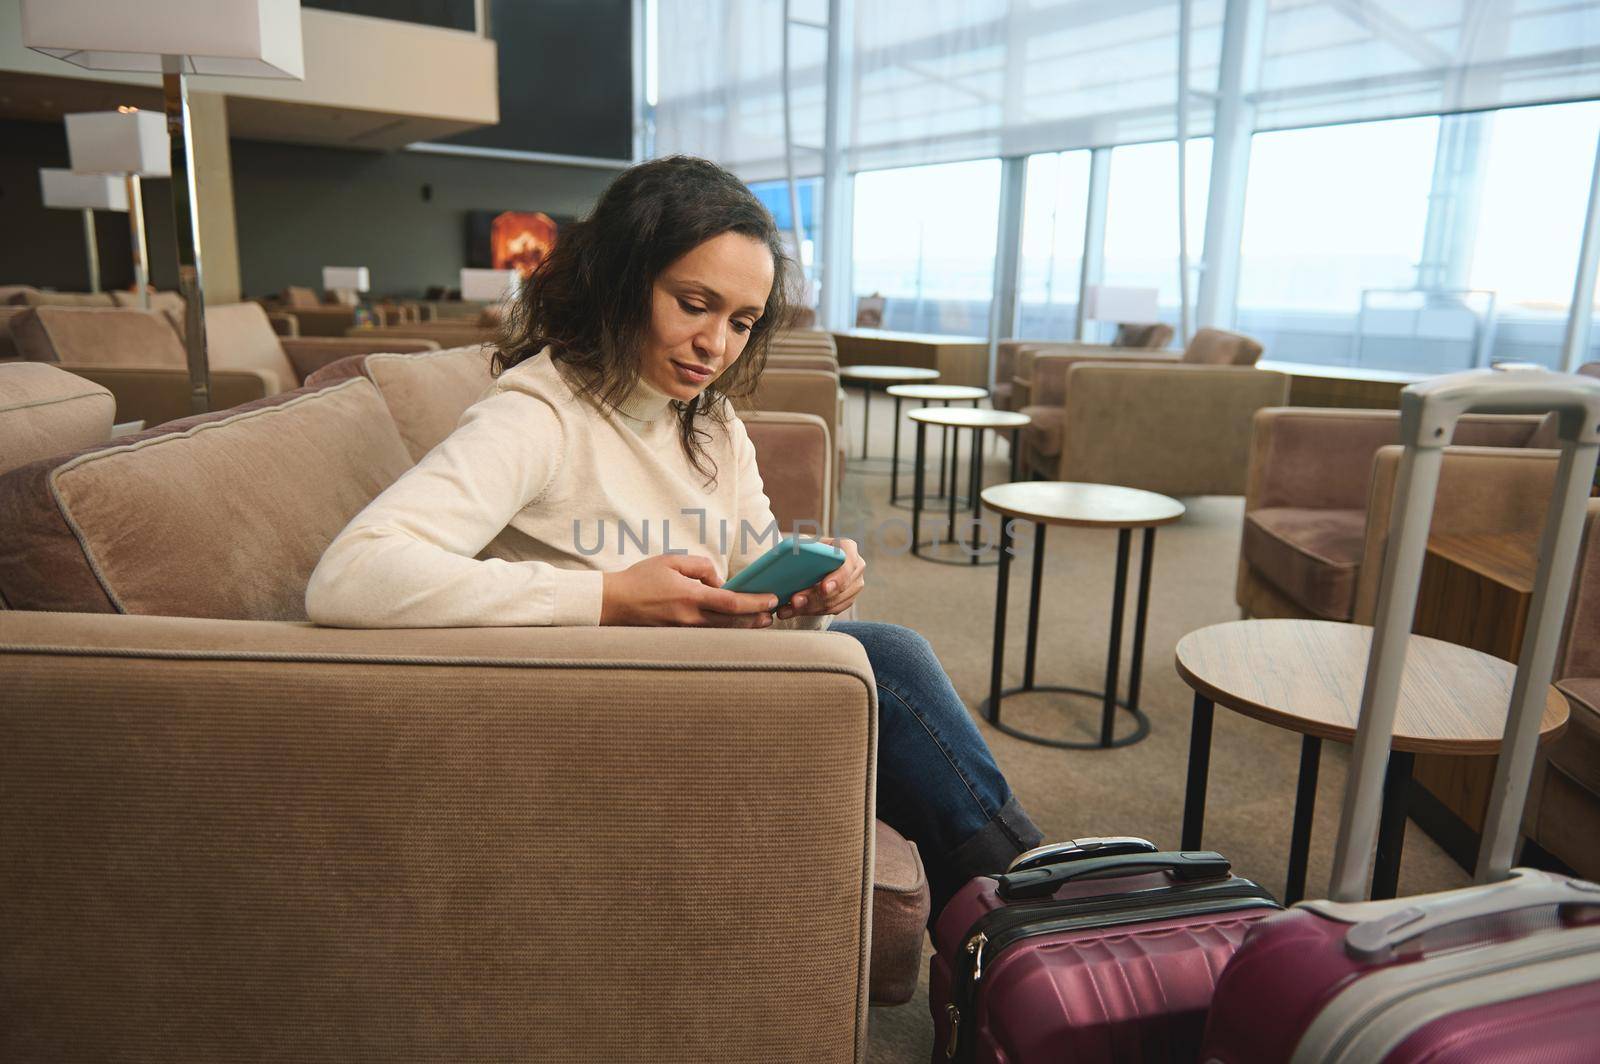 Confident business woman traveling alone, sitting at a table and using a mobile phone, relaxing on an armchair in the luxurious lounge of the airport departure terminal while waiting to board a flight by artgf